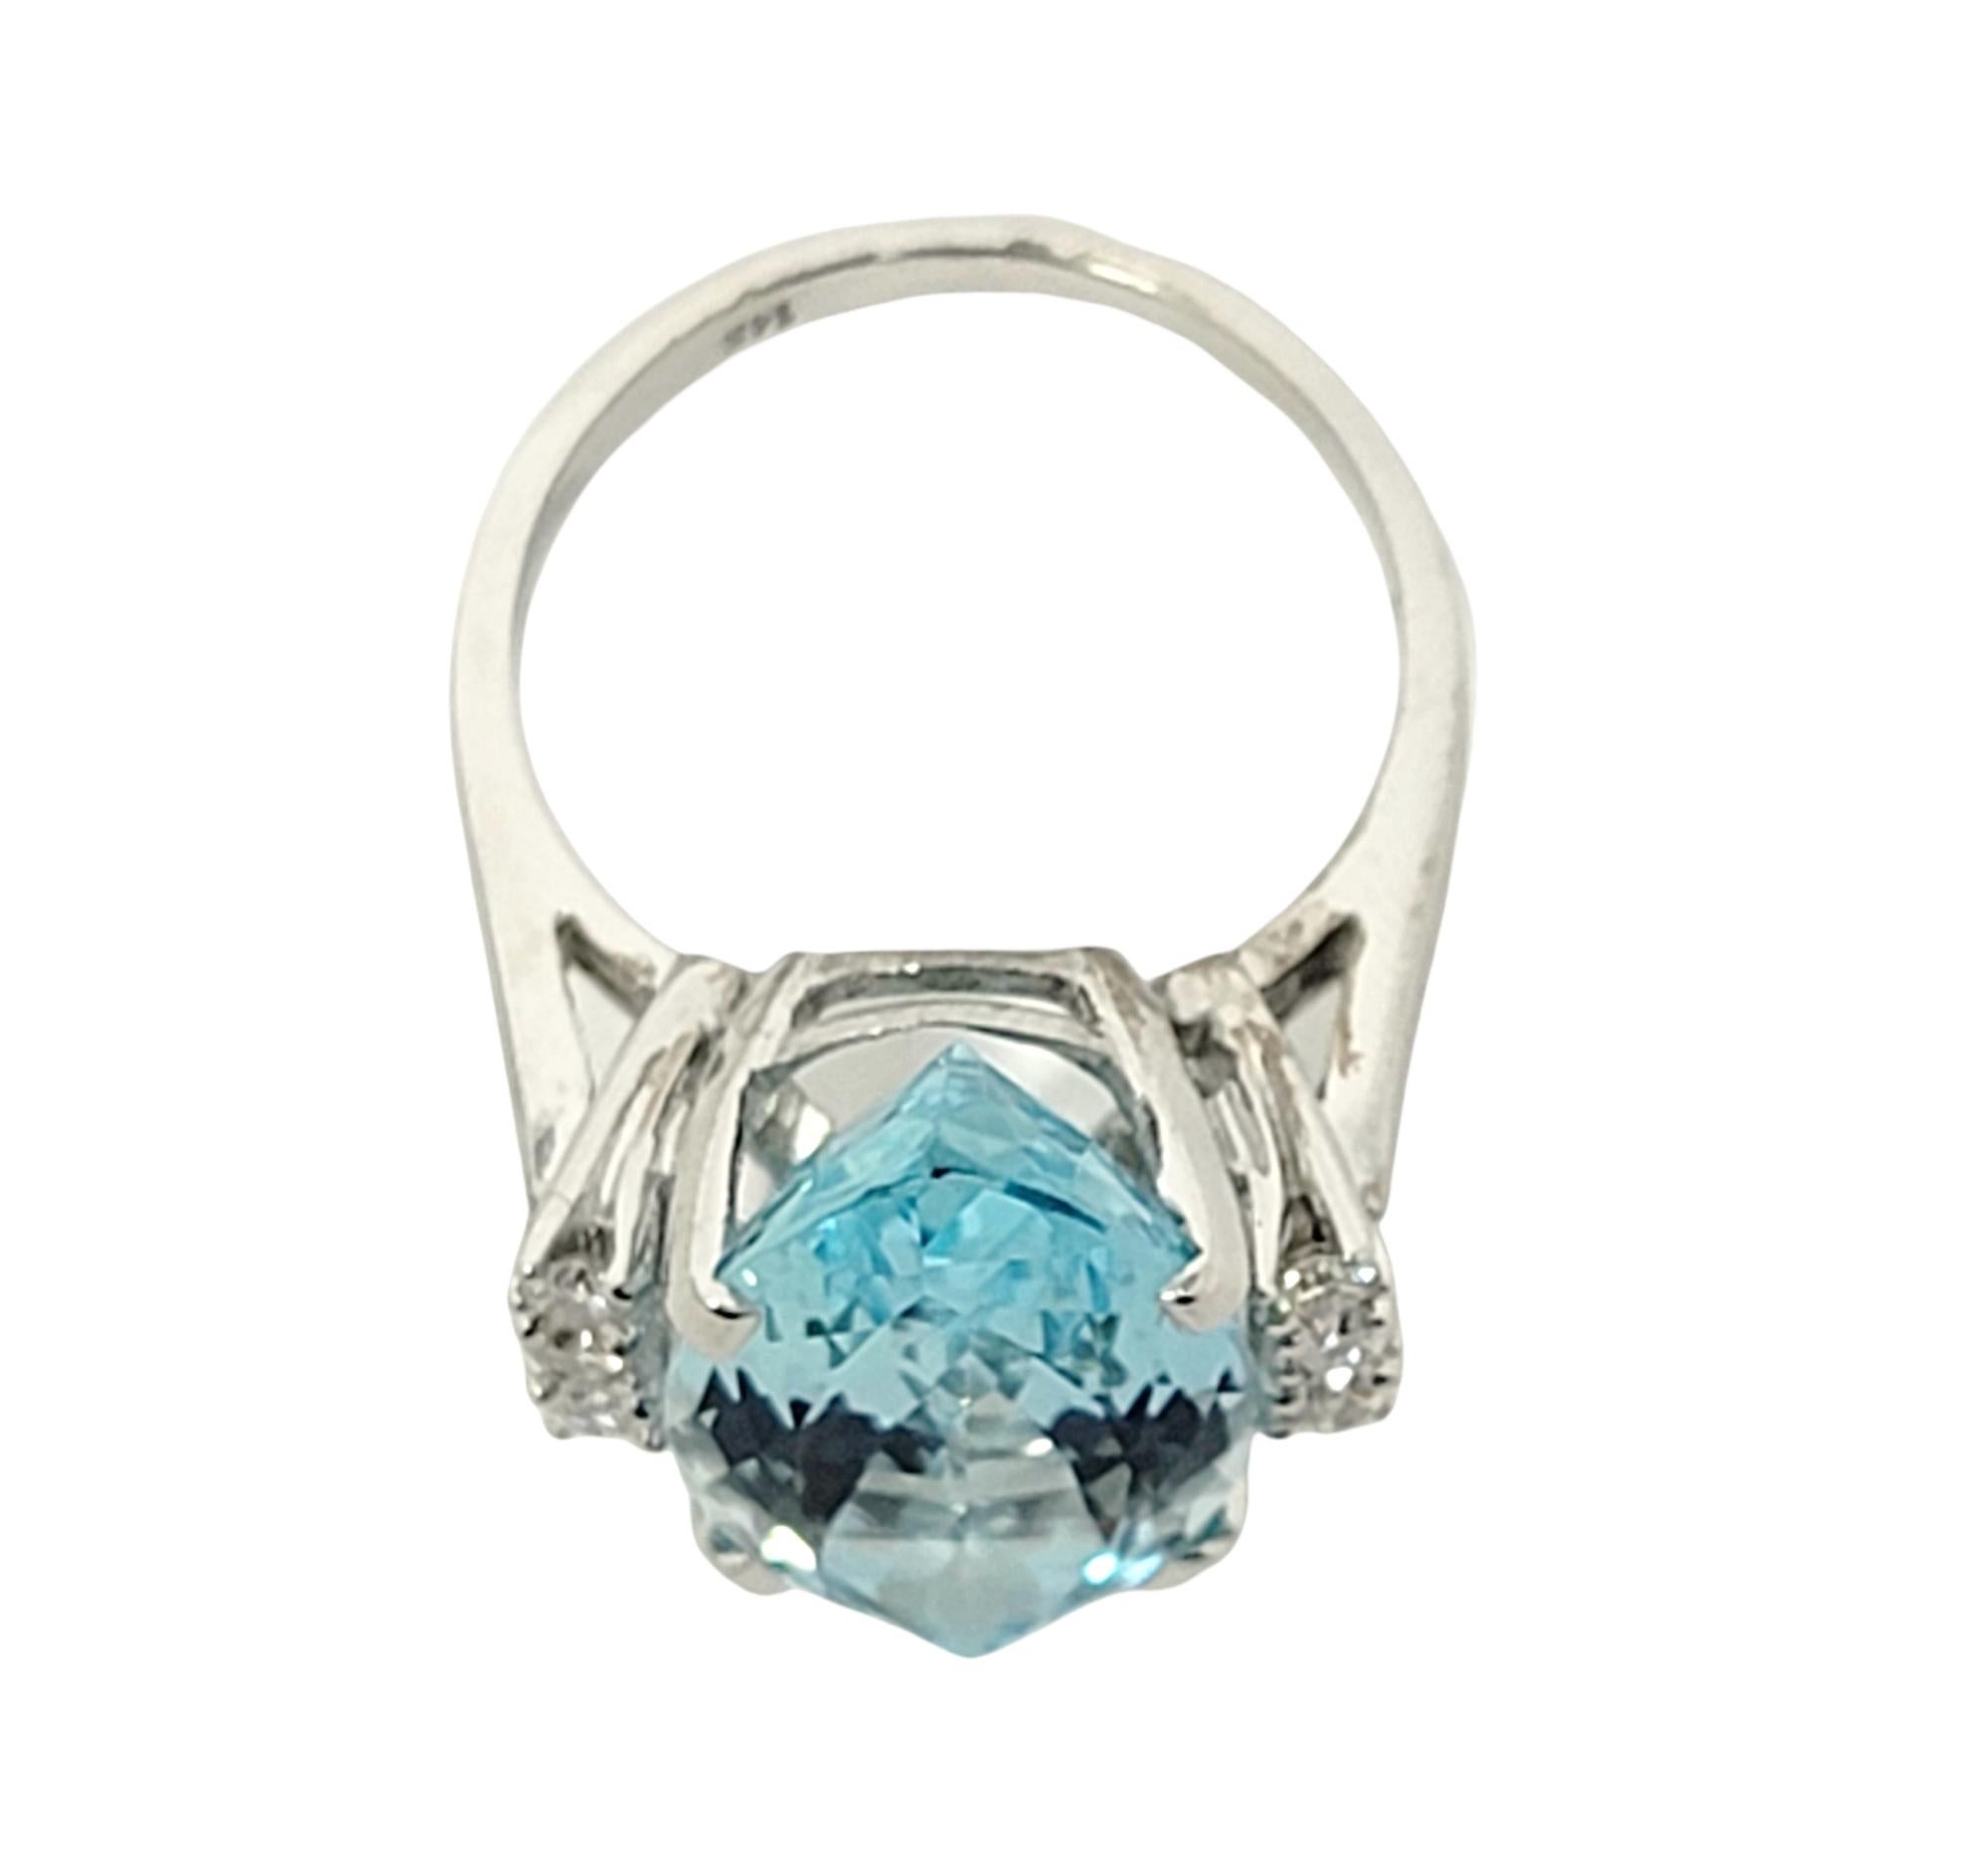 8.61 Carats Total Marquis Cut Aquamarine and Diamond Cocktail Ring 14 Karat Gold For Sale 7